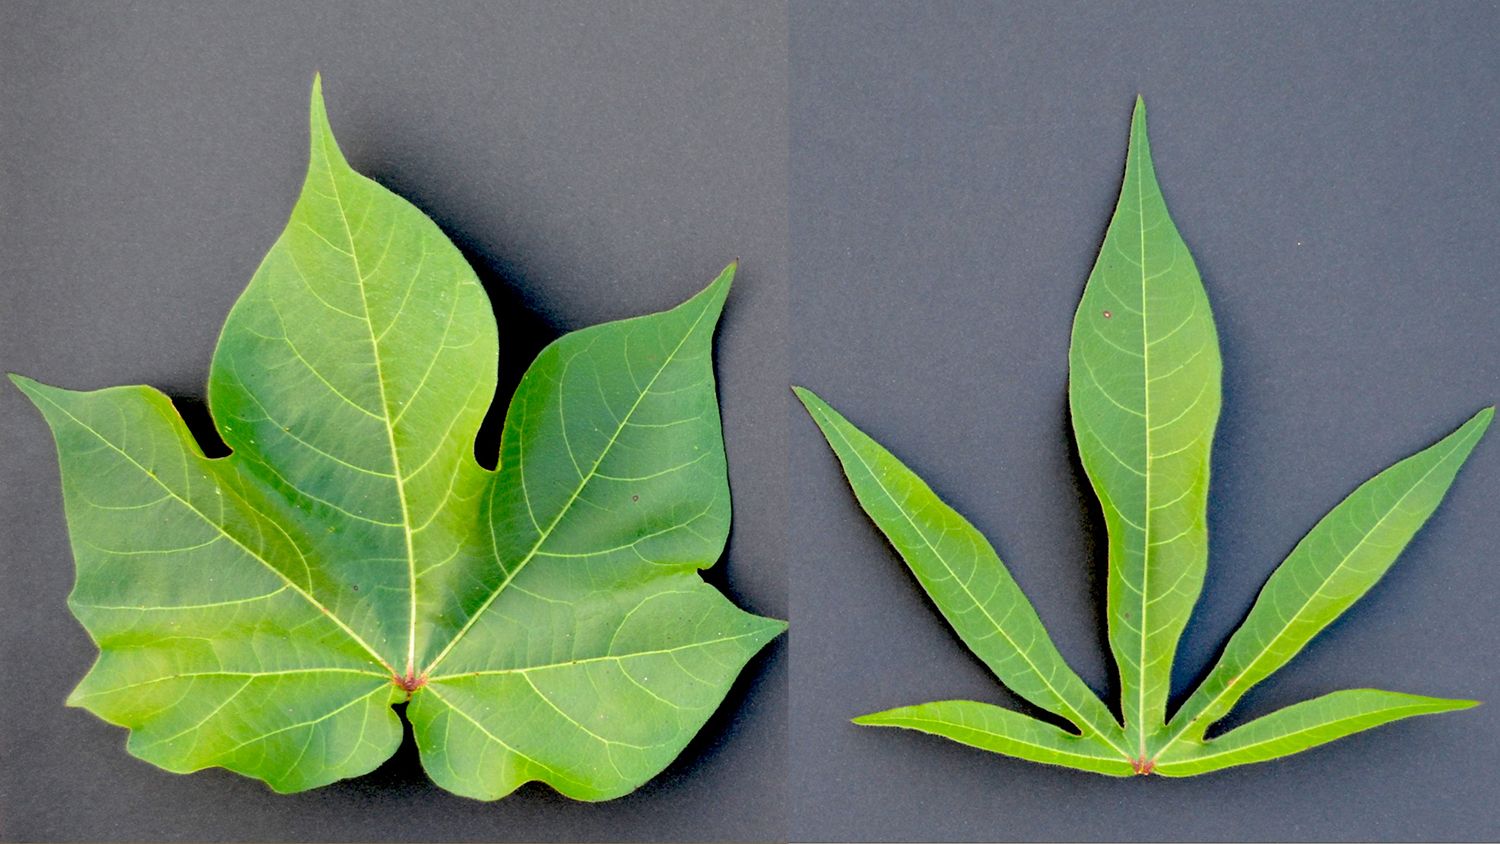 A broad &#039;normal&#039; cotton leaf compared to an &#039;okra&#039;-shaped cotton leaf.